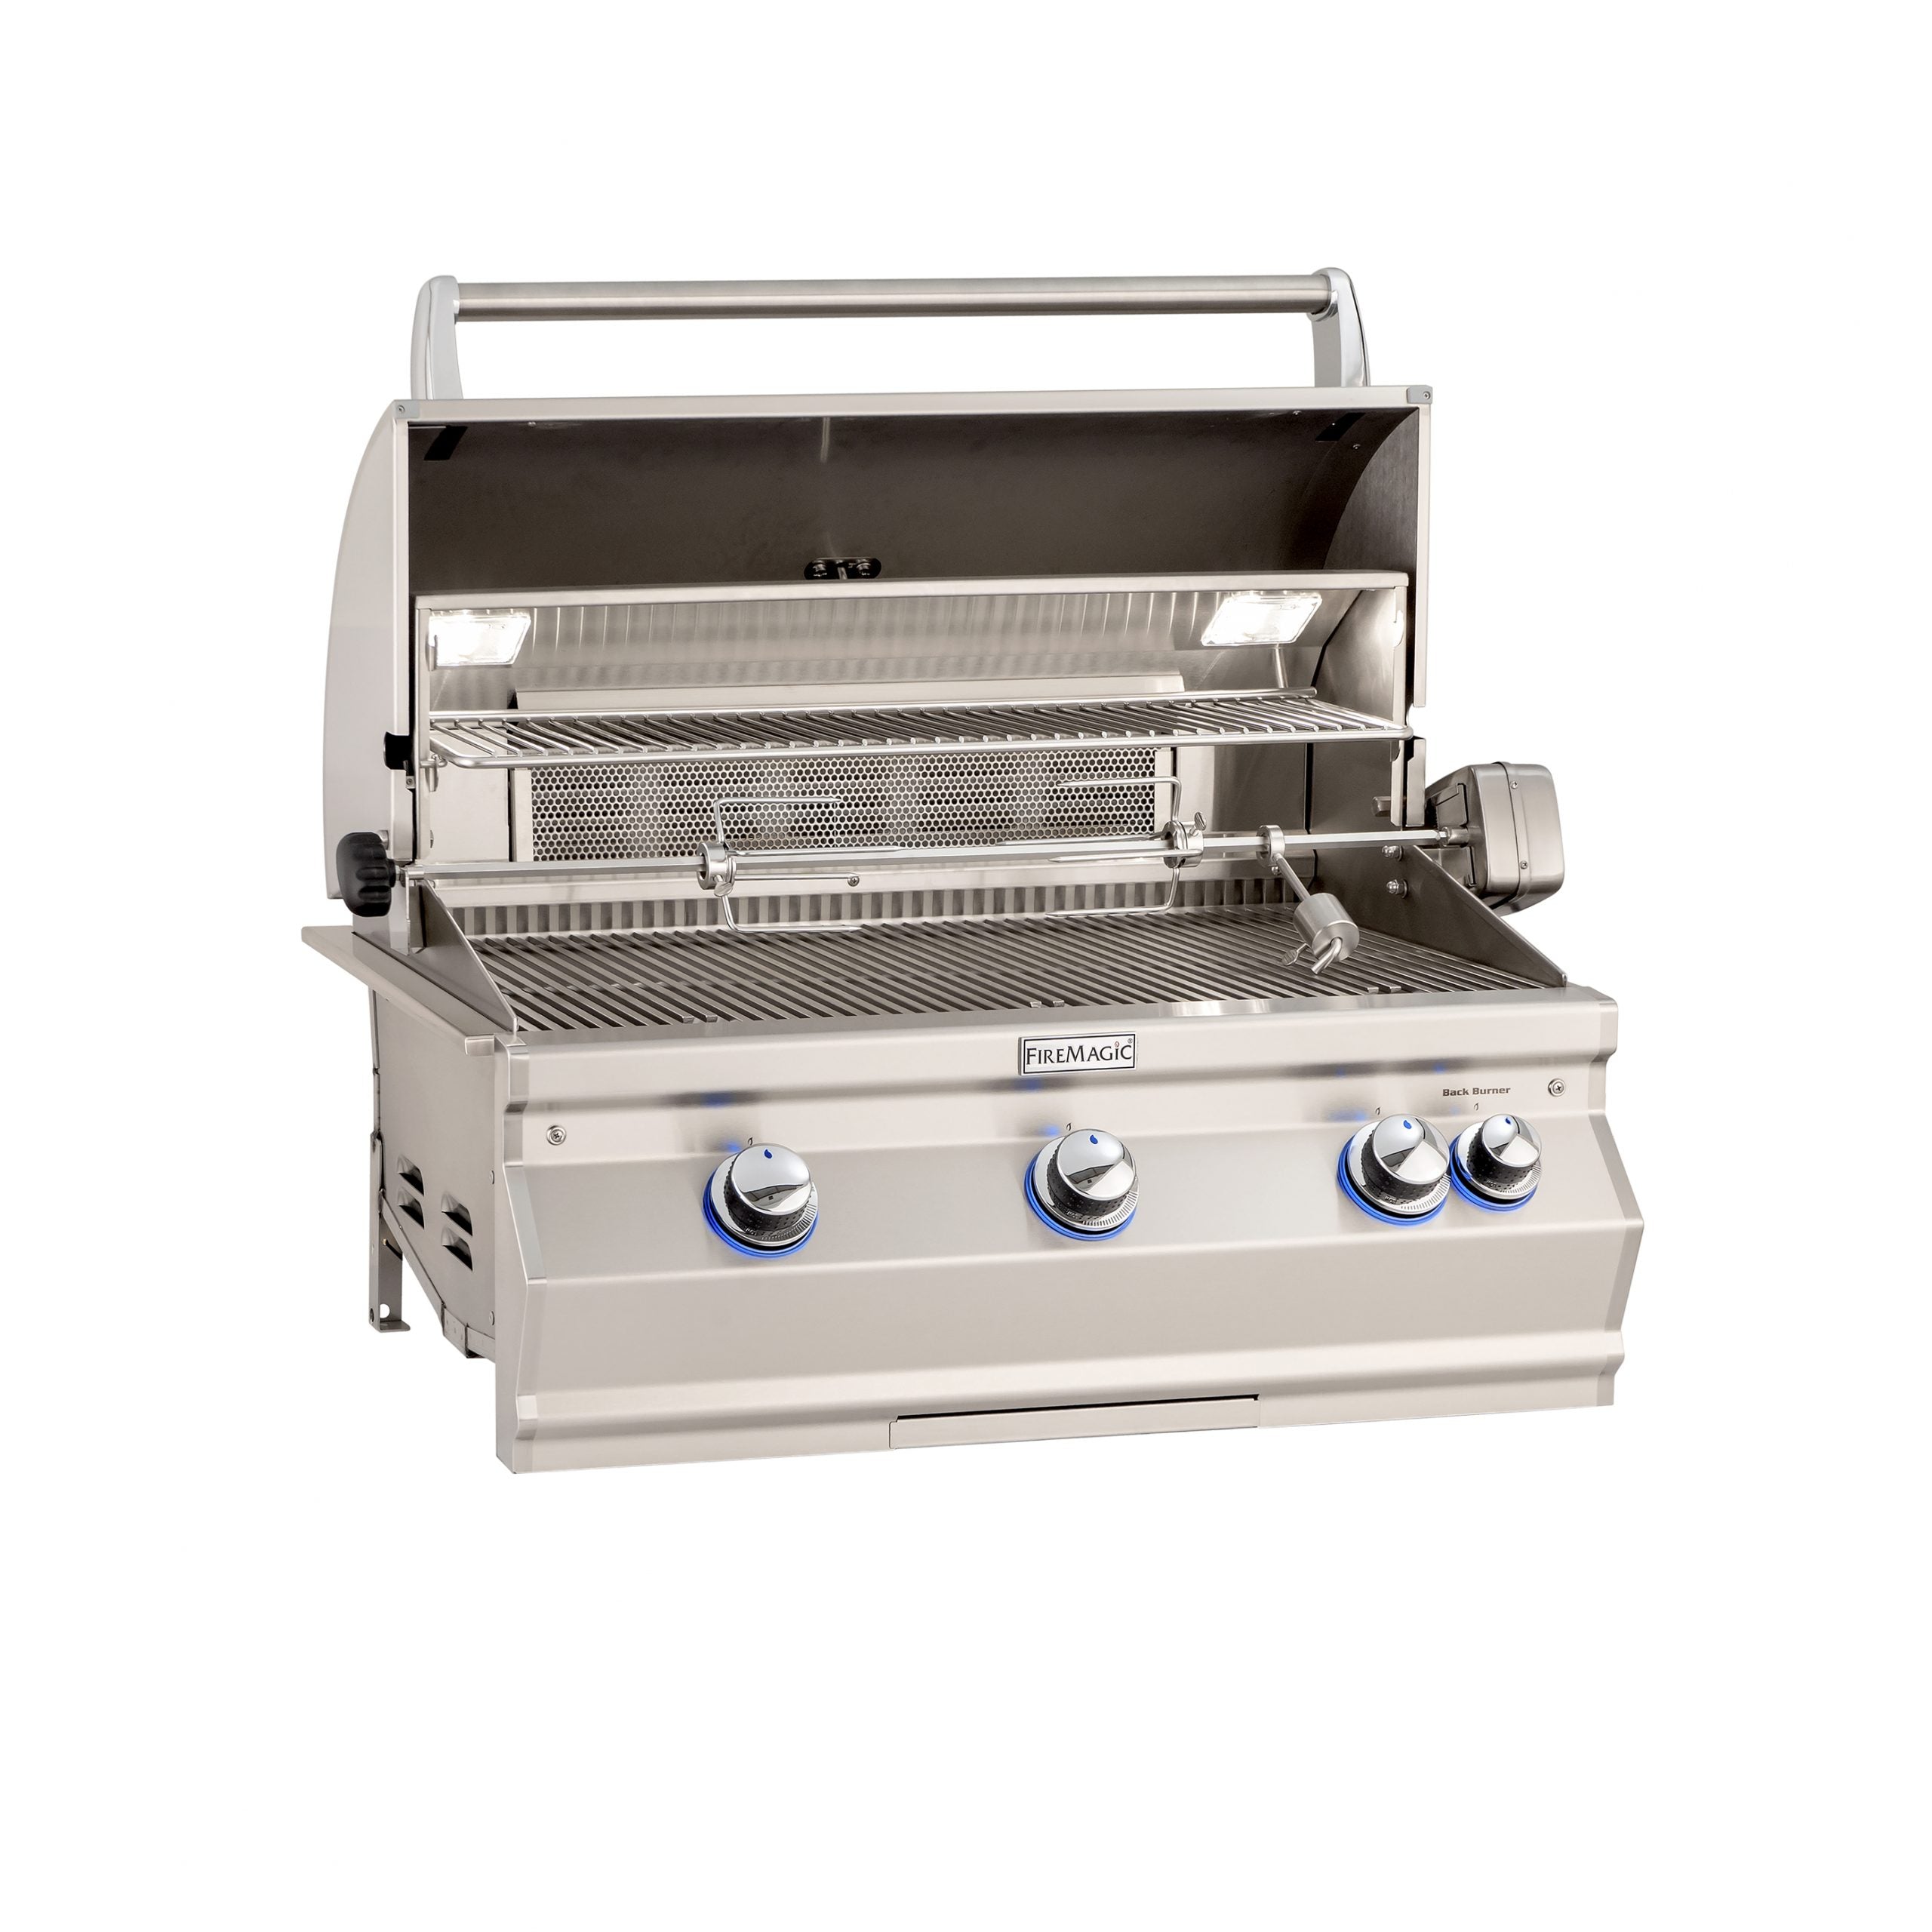 fire-magic-30-a540i-built-in-grill-w-infra-burner-analog-thermometer 2